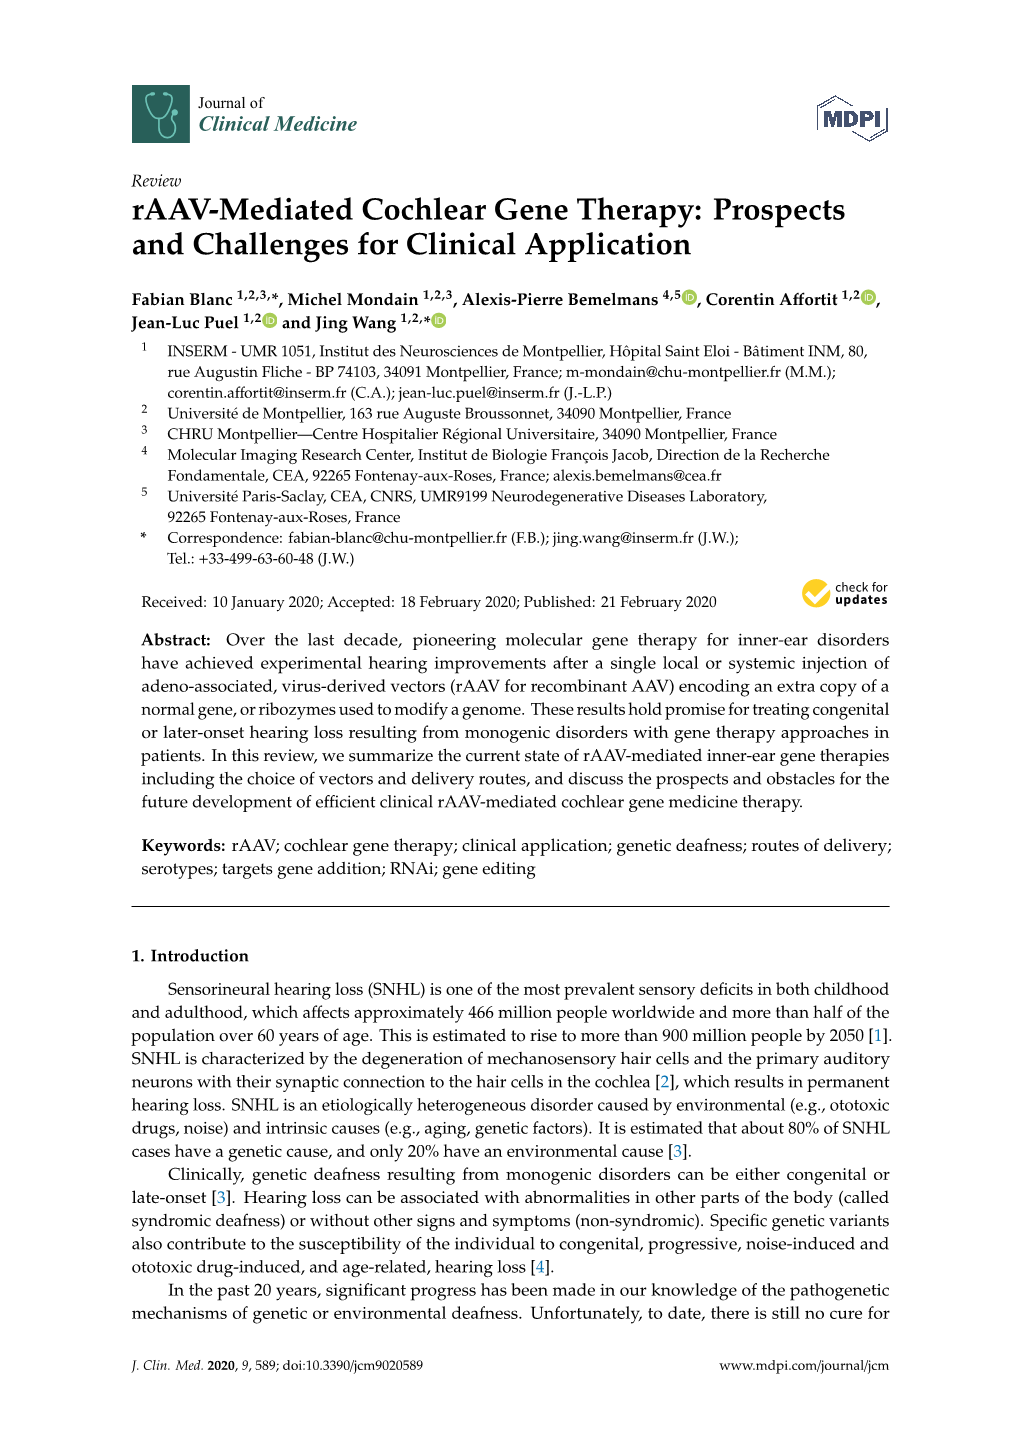 Raav-Mediated Cochlear Gene Therapy: Prospects and Challenges for Clinical Application